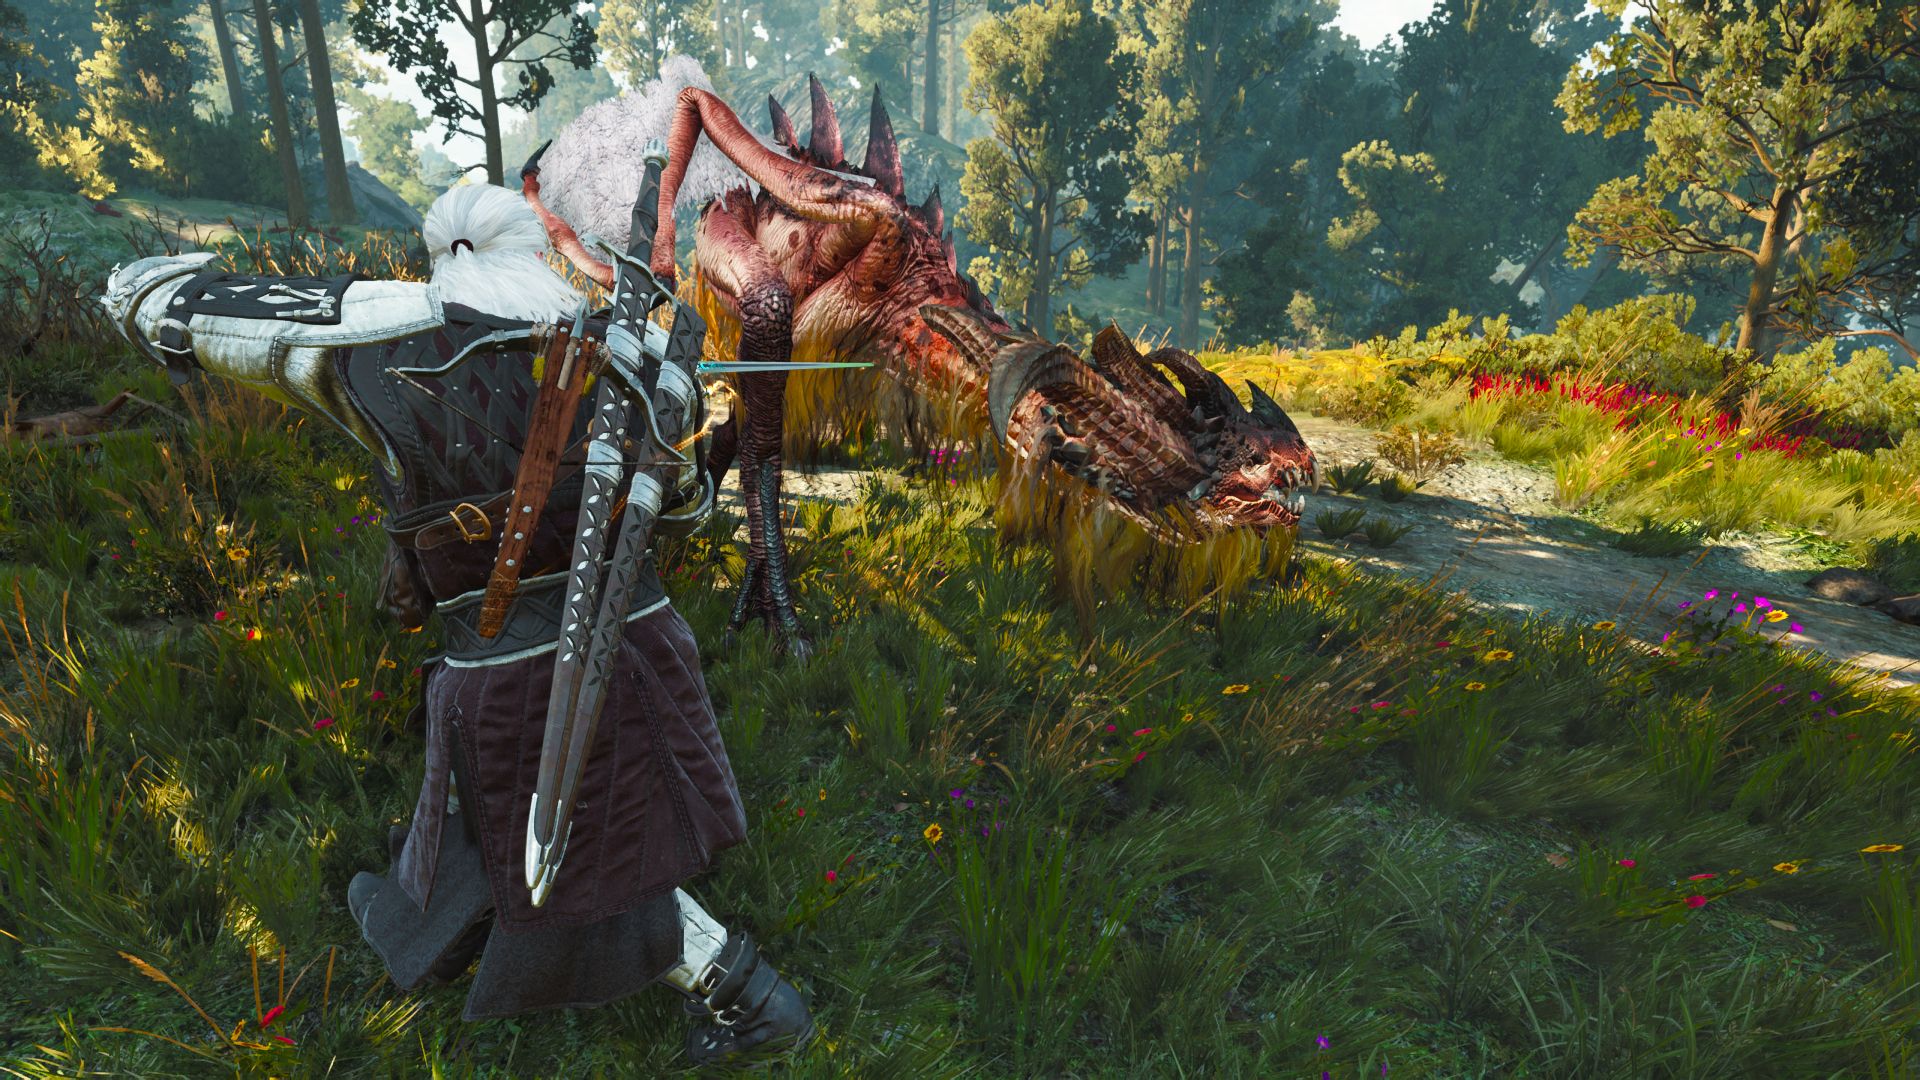 Geralt walks around a wyvern, holding his silver sword and being careful.